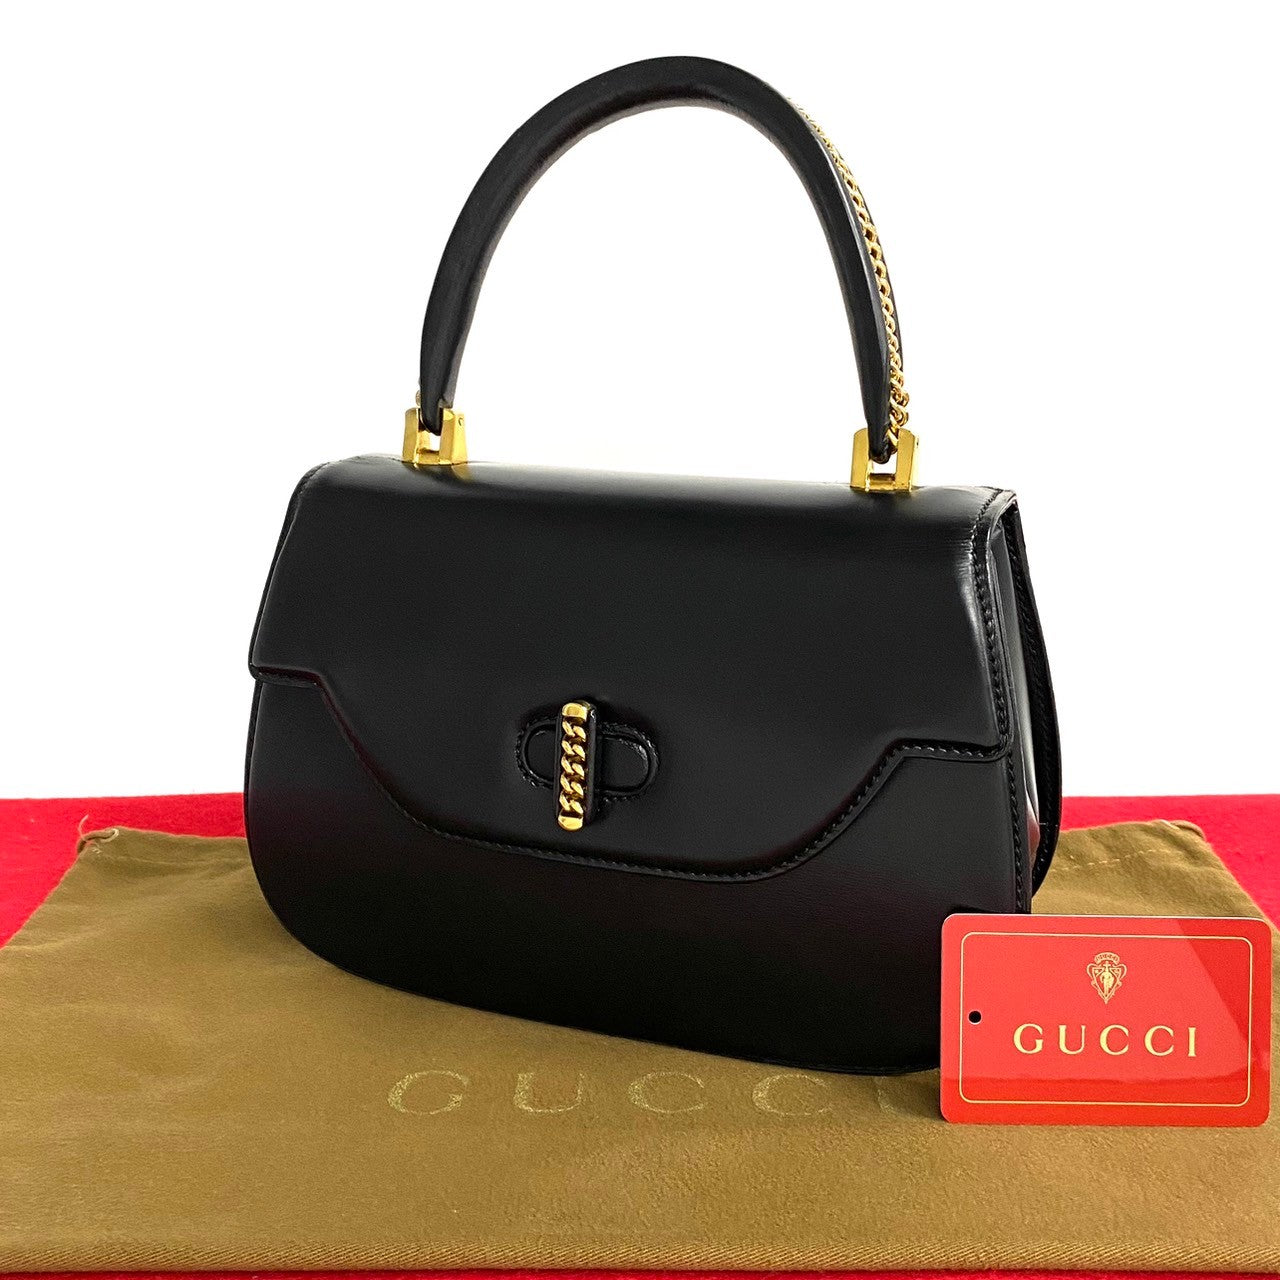 Gucci Leather Turnlock Top Handle Bag  Leather Handbag in Good condition